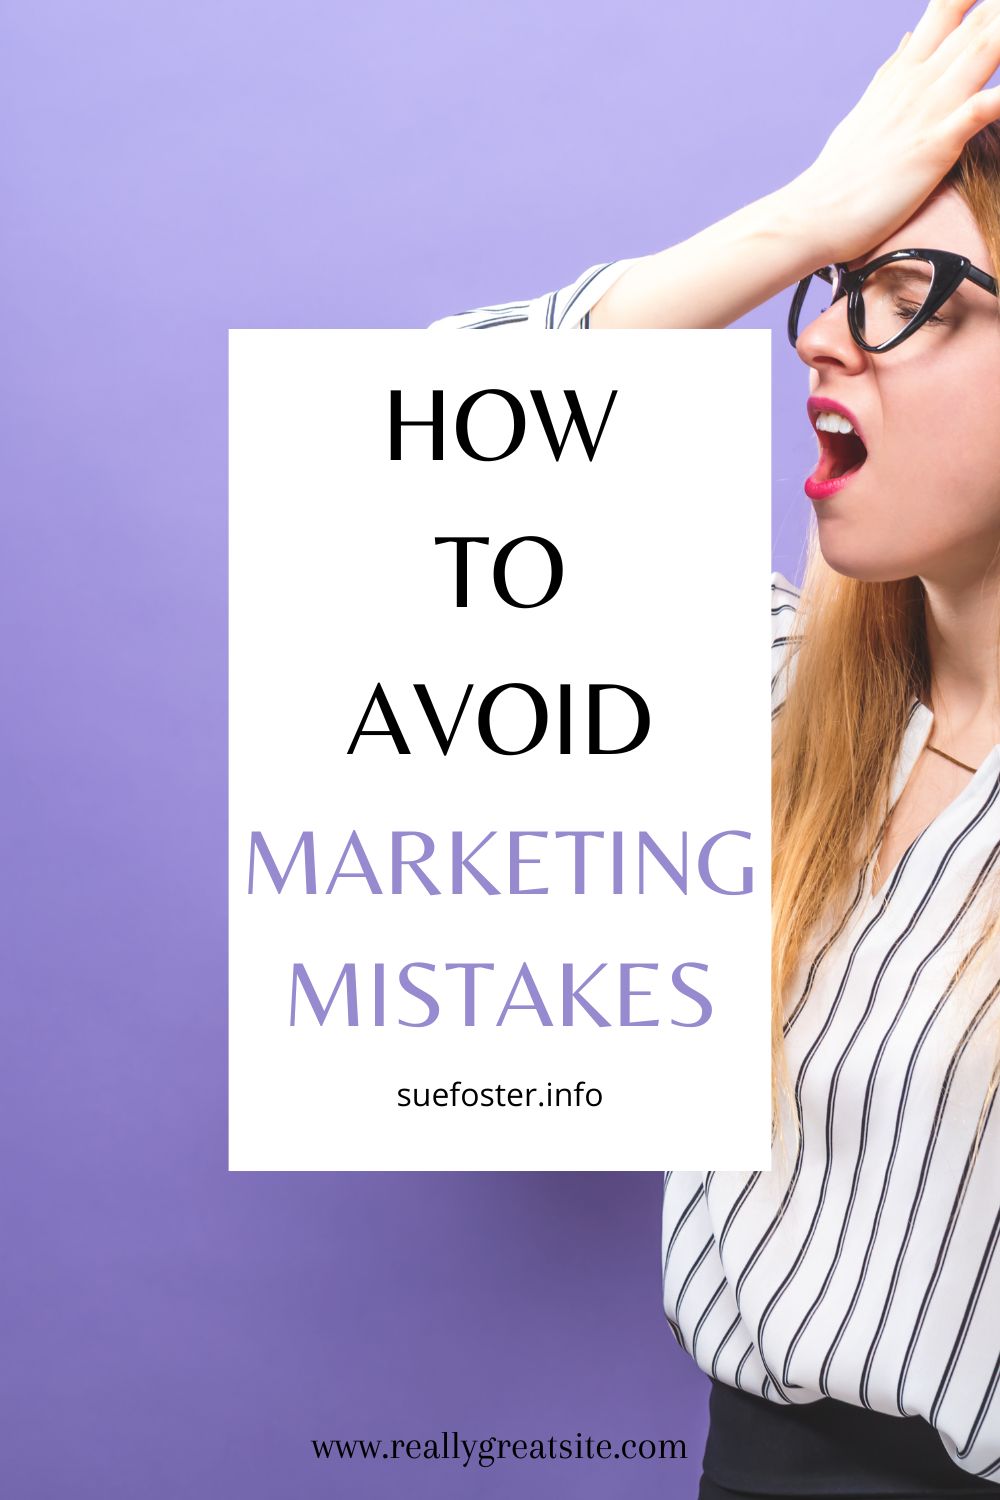 There are several common mistakes businesses tend to make in their marketing efforts that can result in a waste of money. Here are some of them.